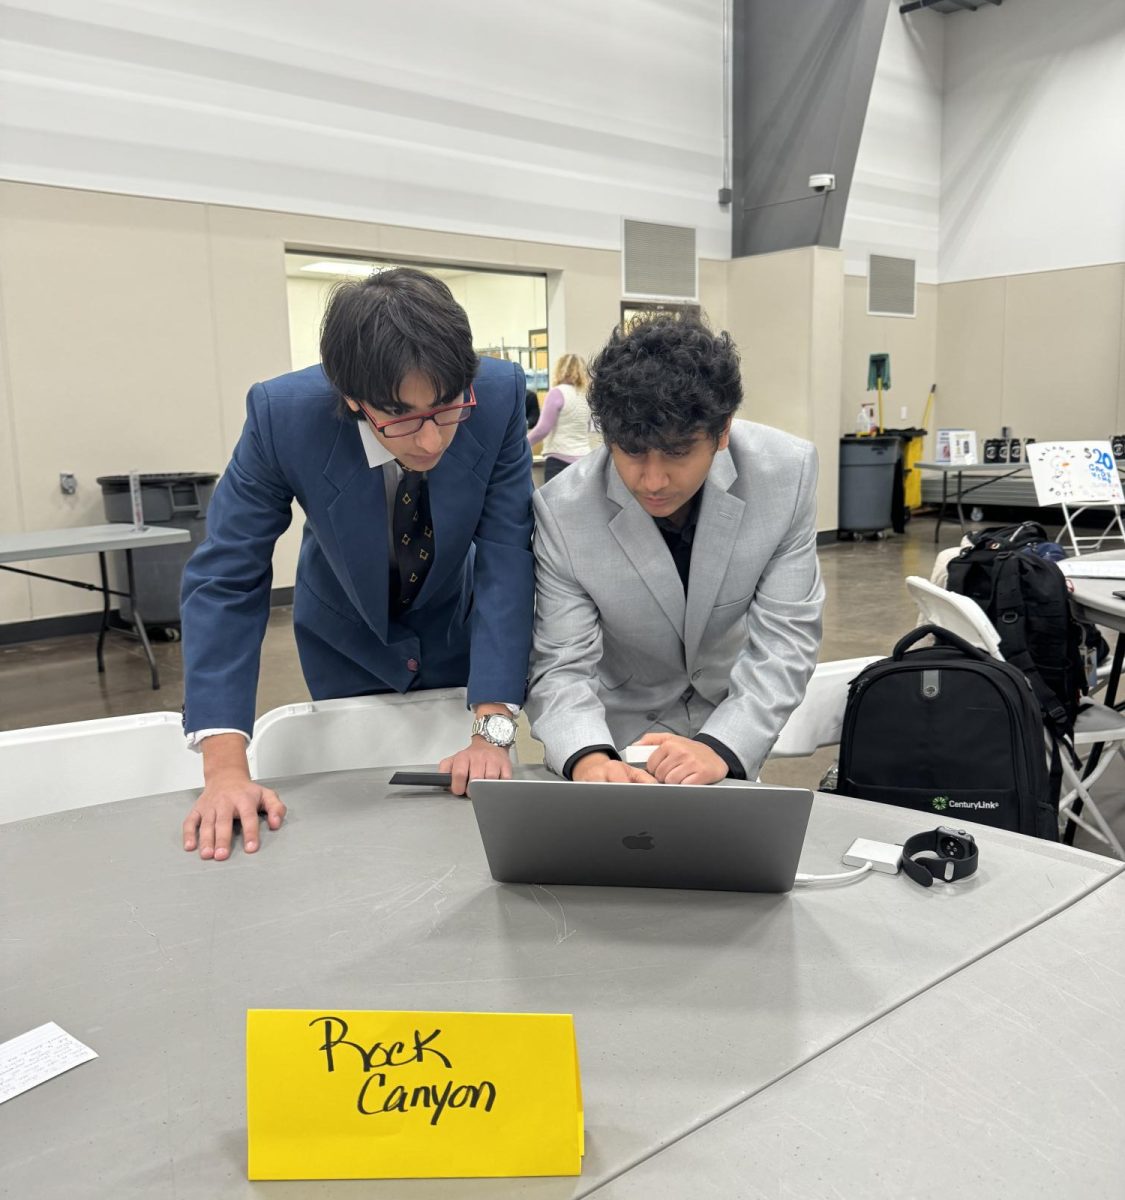 Ravi Khotra ‘26 consults Avi Khanna ‘26 on last-minute updates for their presentation at Future Business Leaders of America (FBLA) Districts at Arapahoe Fairgrounds Feb. 7. If the group placed in one of the top four positions for their competition, they will progress to FBLA State, which is held at the Gaylord Hotel in April. “I think FBLA is a great club to join because of the experiences at State and Nationals,” Khotra said.